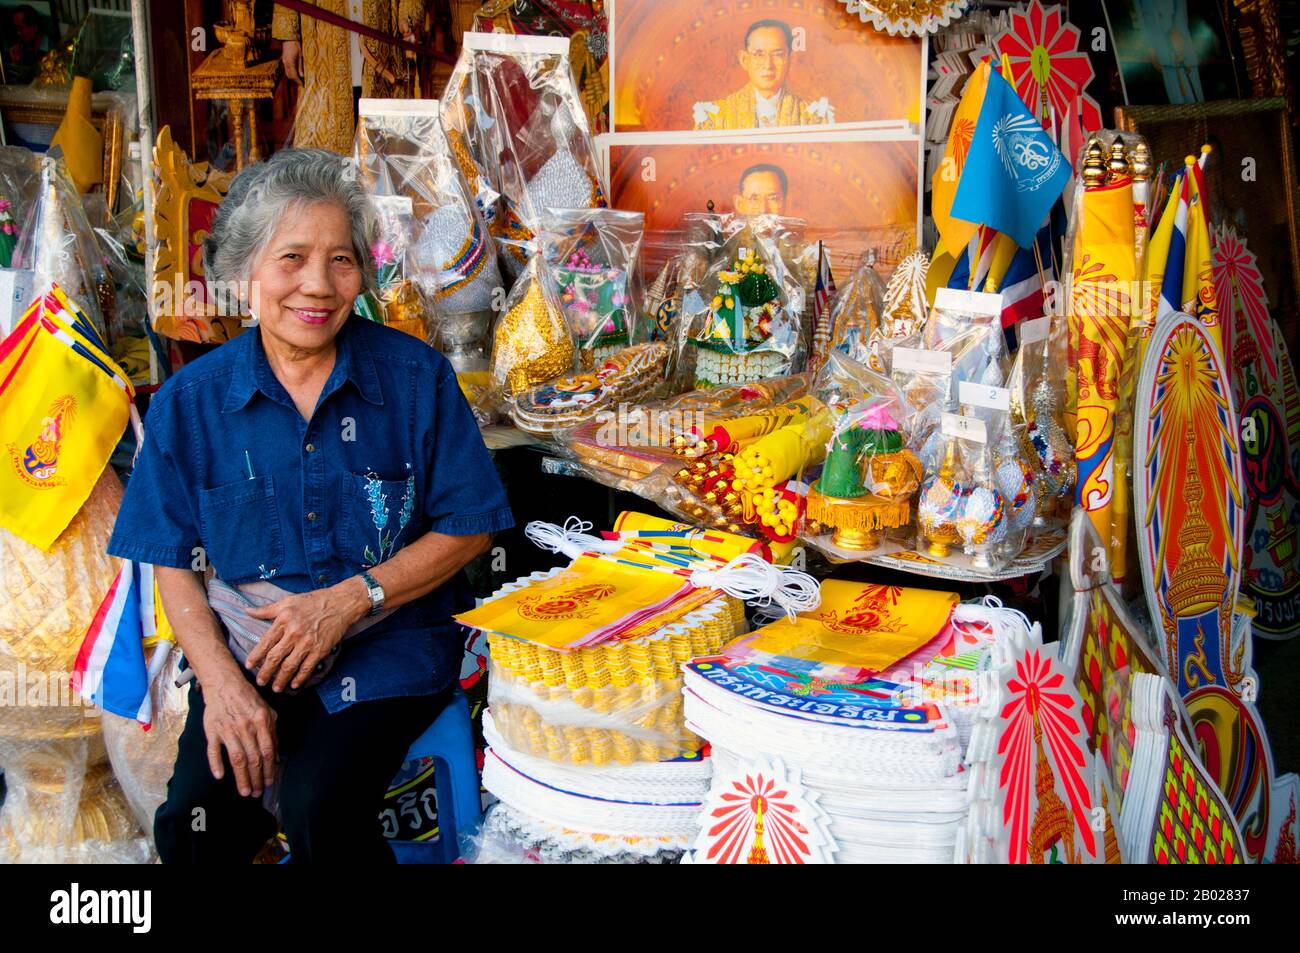 Thailand: A Thai woman sells royal paraphernalia including yellow royal flags for King Bhumibol (Rama IX) in Banglamphu, Bangkok. Bhumibol Adulyadej (Phumiphon Adunyadet; 5 December 1927 - 13 October 2016) was the King of Thailand. He was known as Rama IX (and within the Thai royal family and to close associates simply as Lek. Having reigned from 9 June 1946, he was the longest-reigning monarch in Thai history. Stock Photo